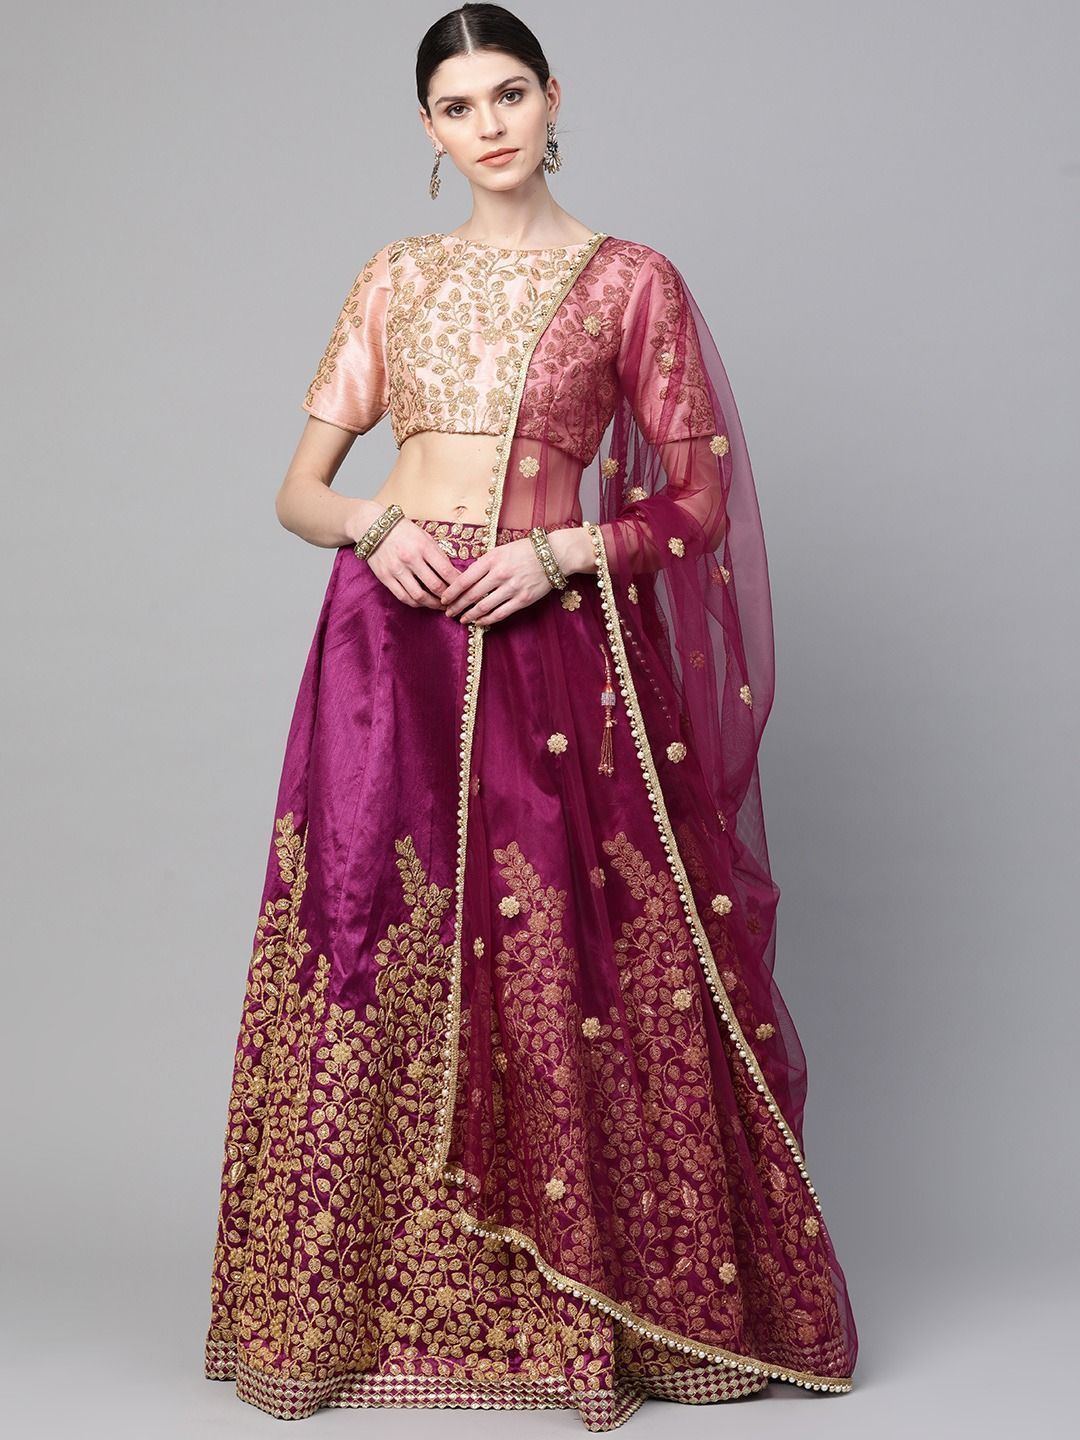 Purple & Peach-Coloured Embroidered Semi-Stitched Myntra Lehenga & Unstitched Blouse with Dupatta